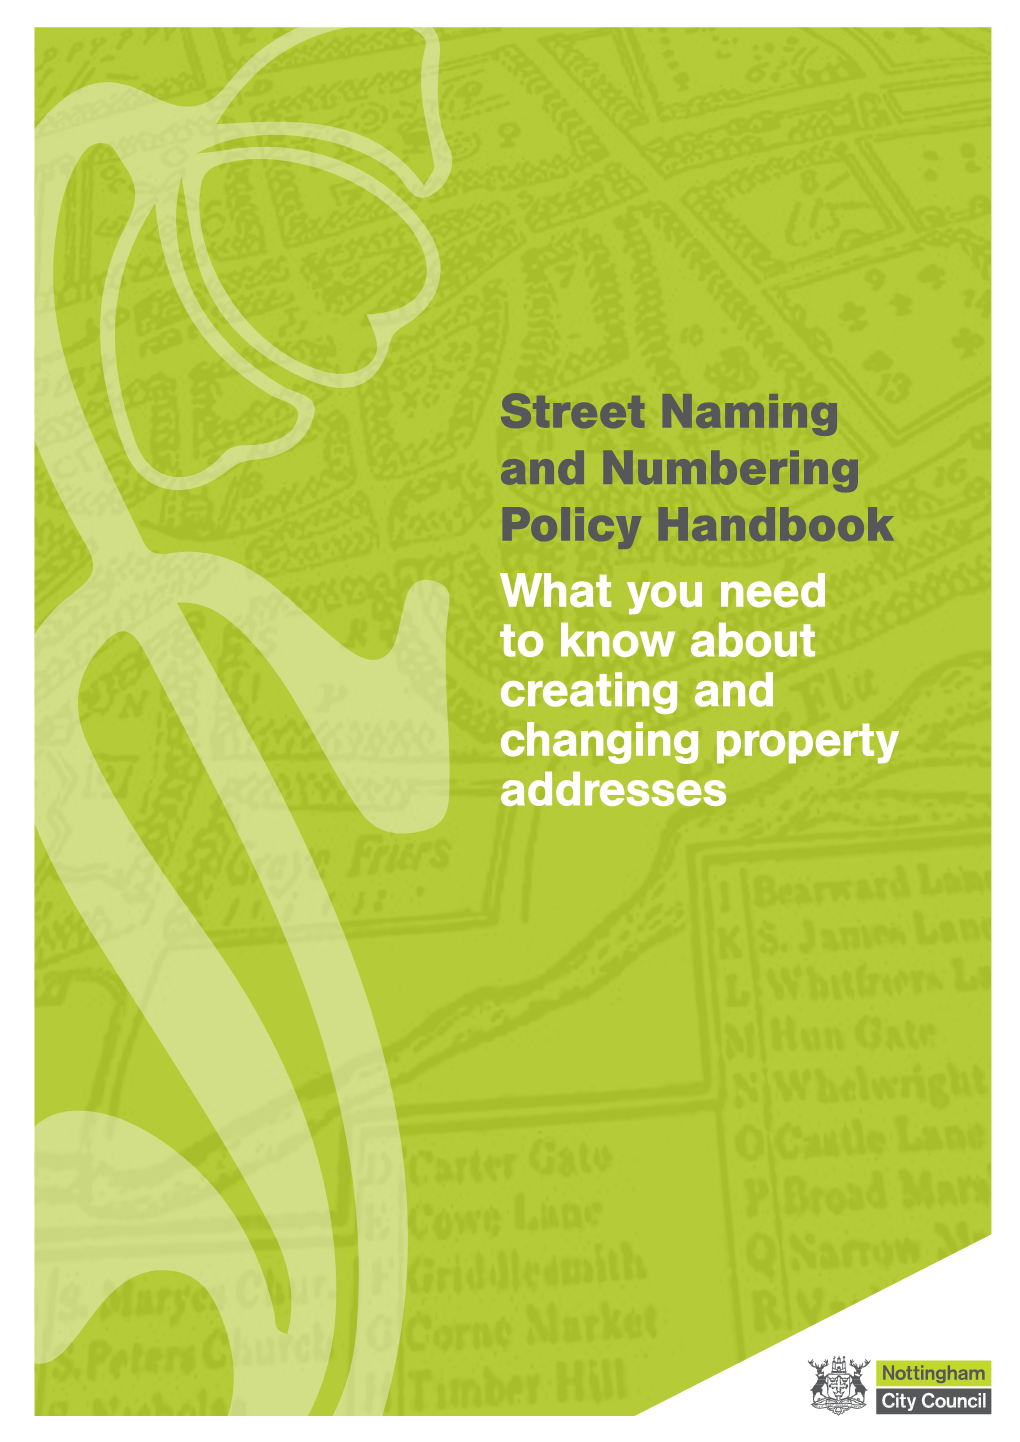 Street Naming and Numbering Policy Handbook What You Need to Know About Creating and Changing Property Addresses